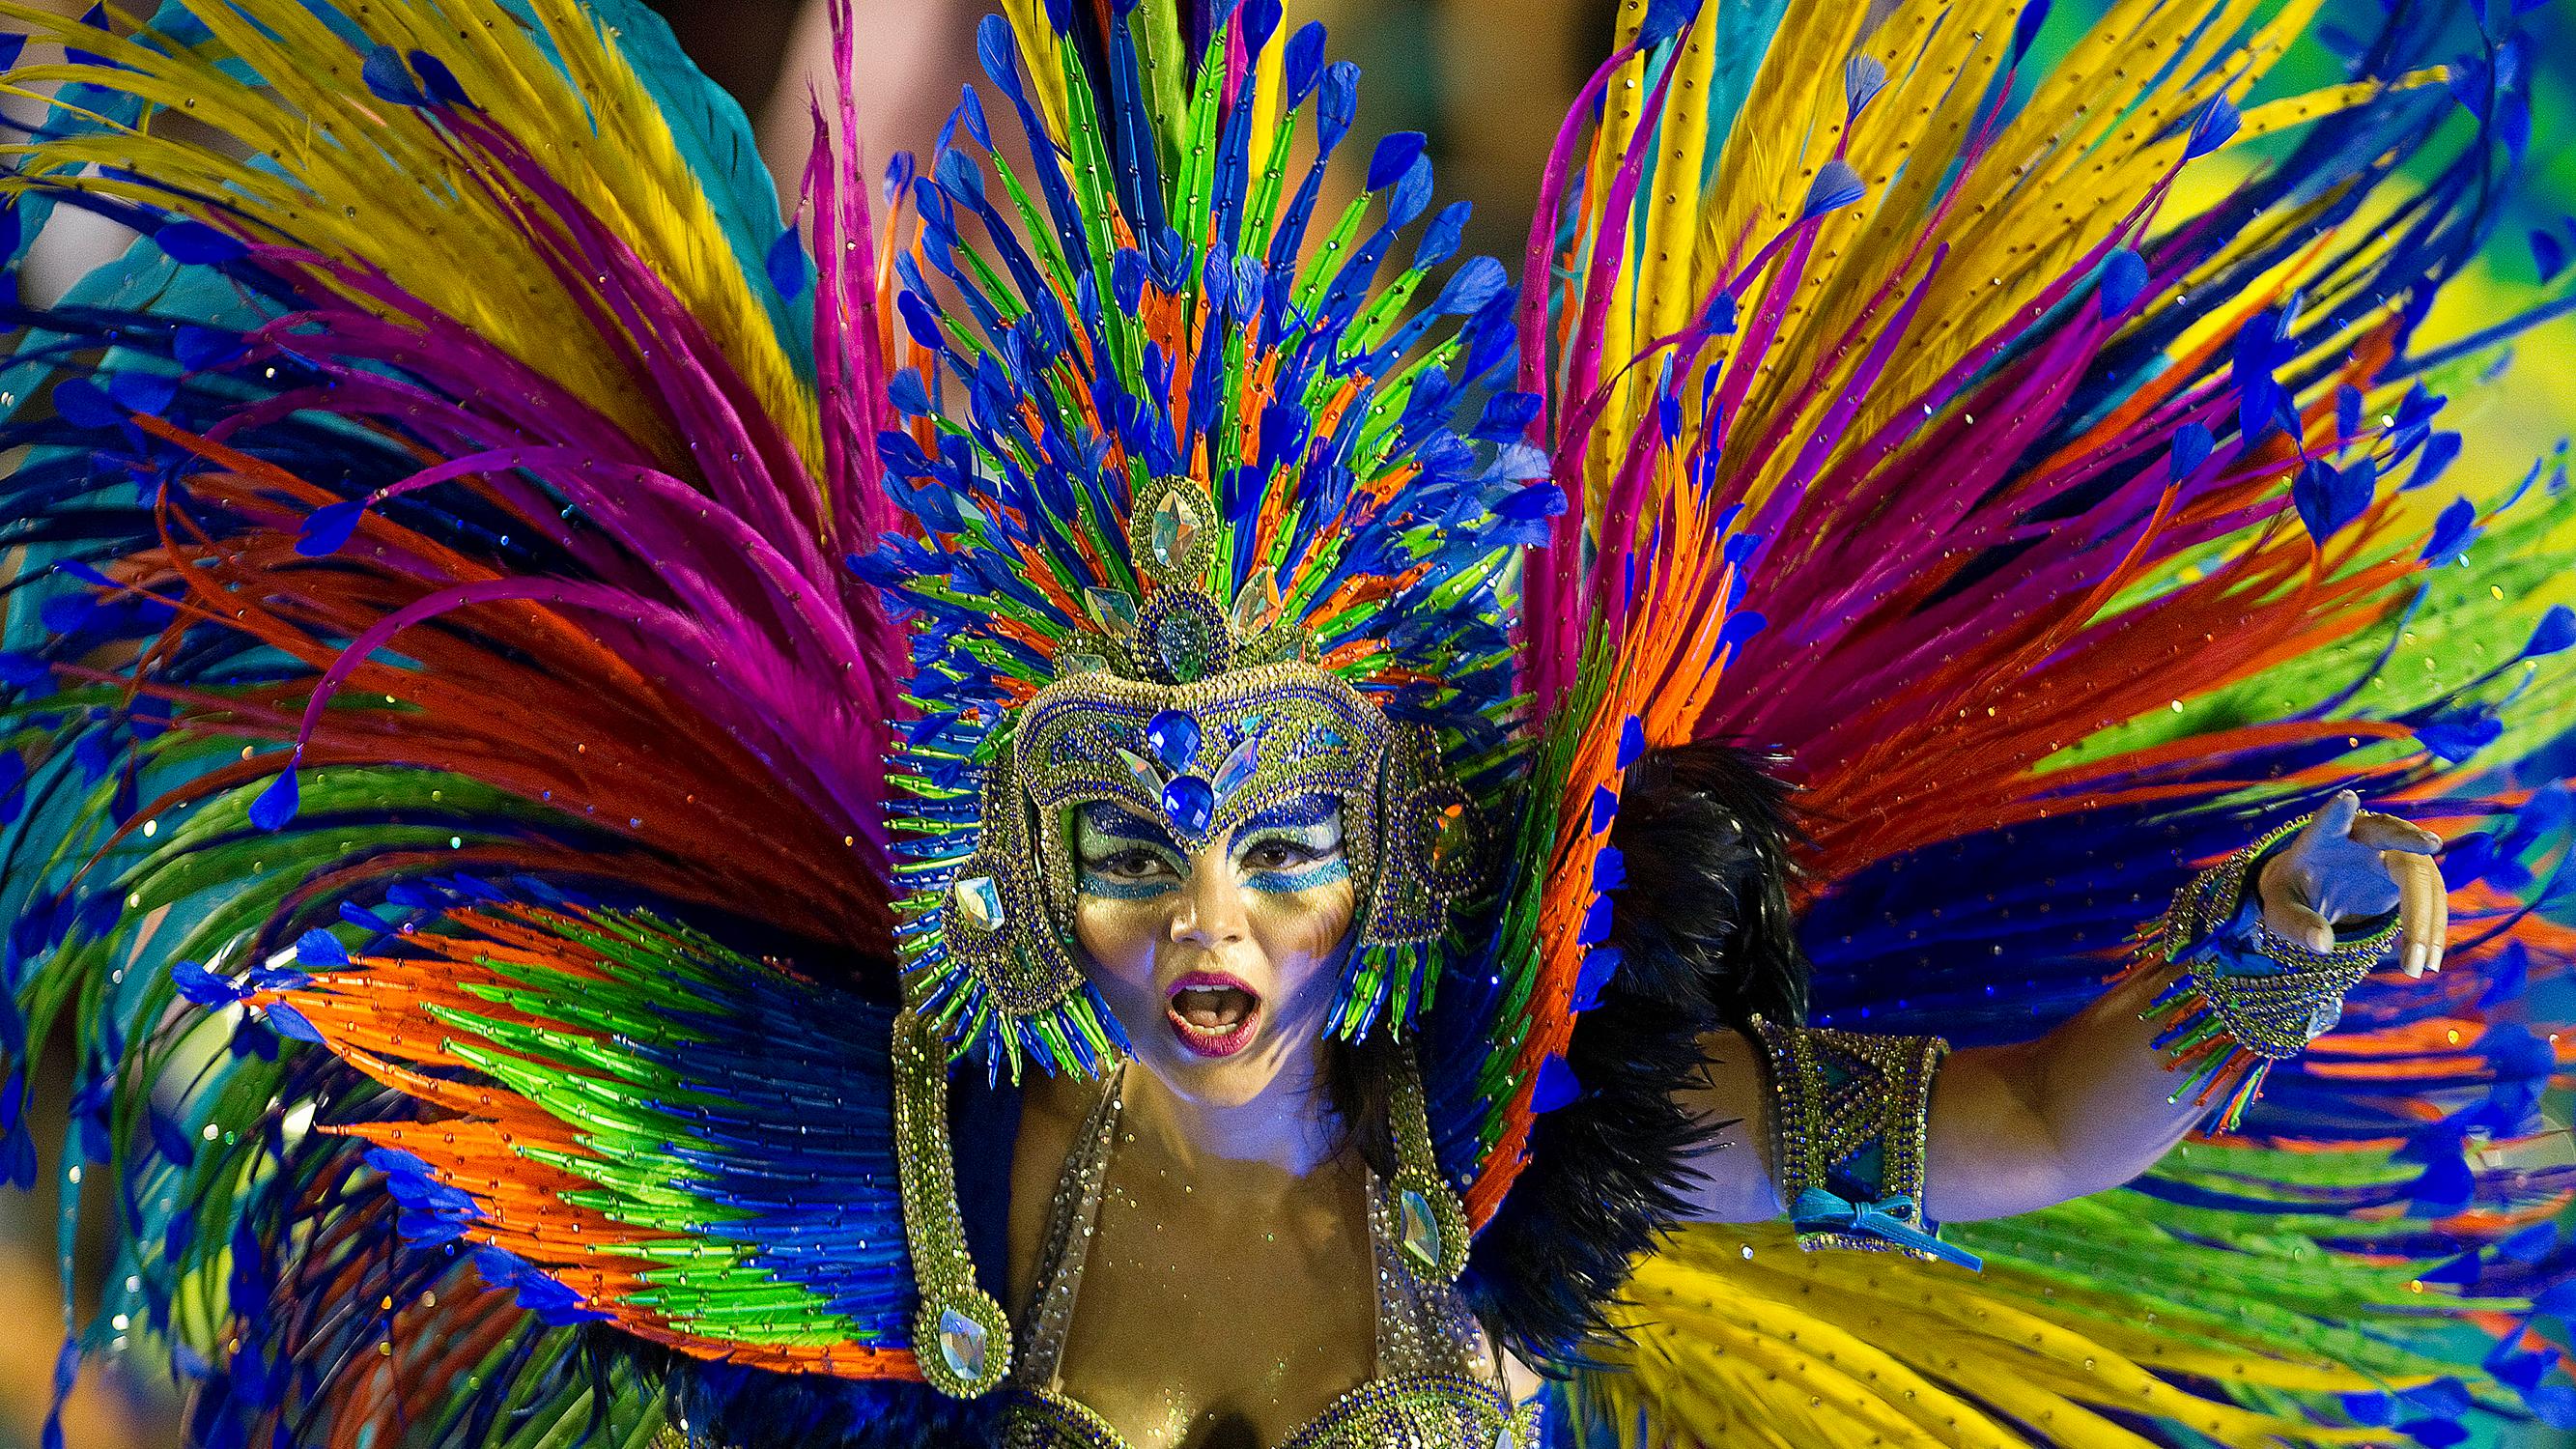 The Best Mardi Gras Costumes & Carnival Costumes for Your Celebration [ Costume Guide] - HalloweenCostumes.com Blog